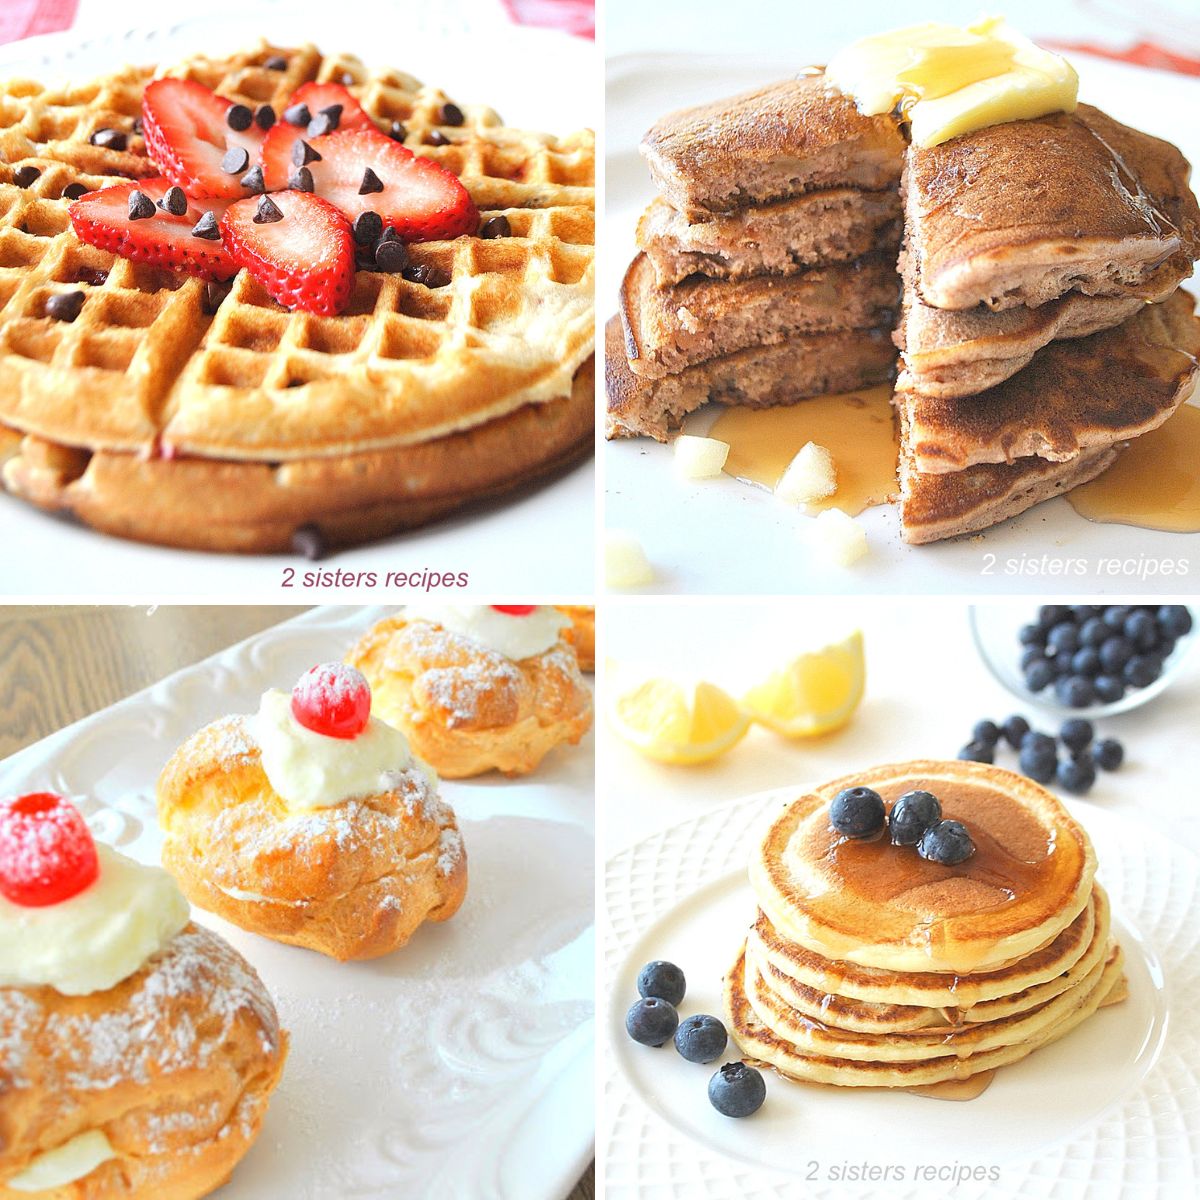 Pancake Day or Fat Tuesday! by 2sistersrecipes.com